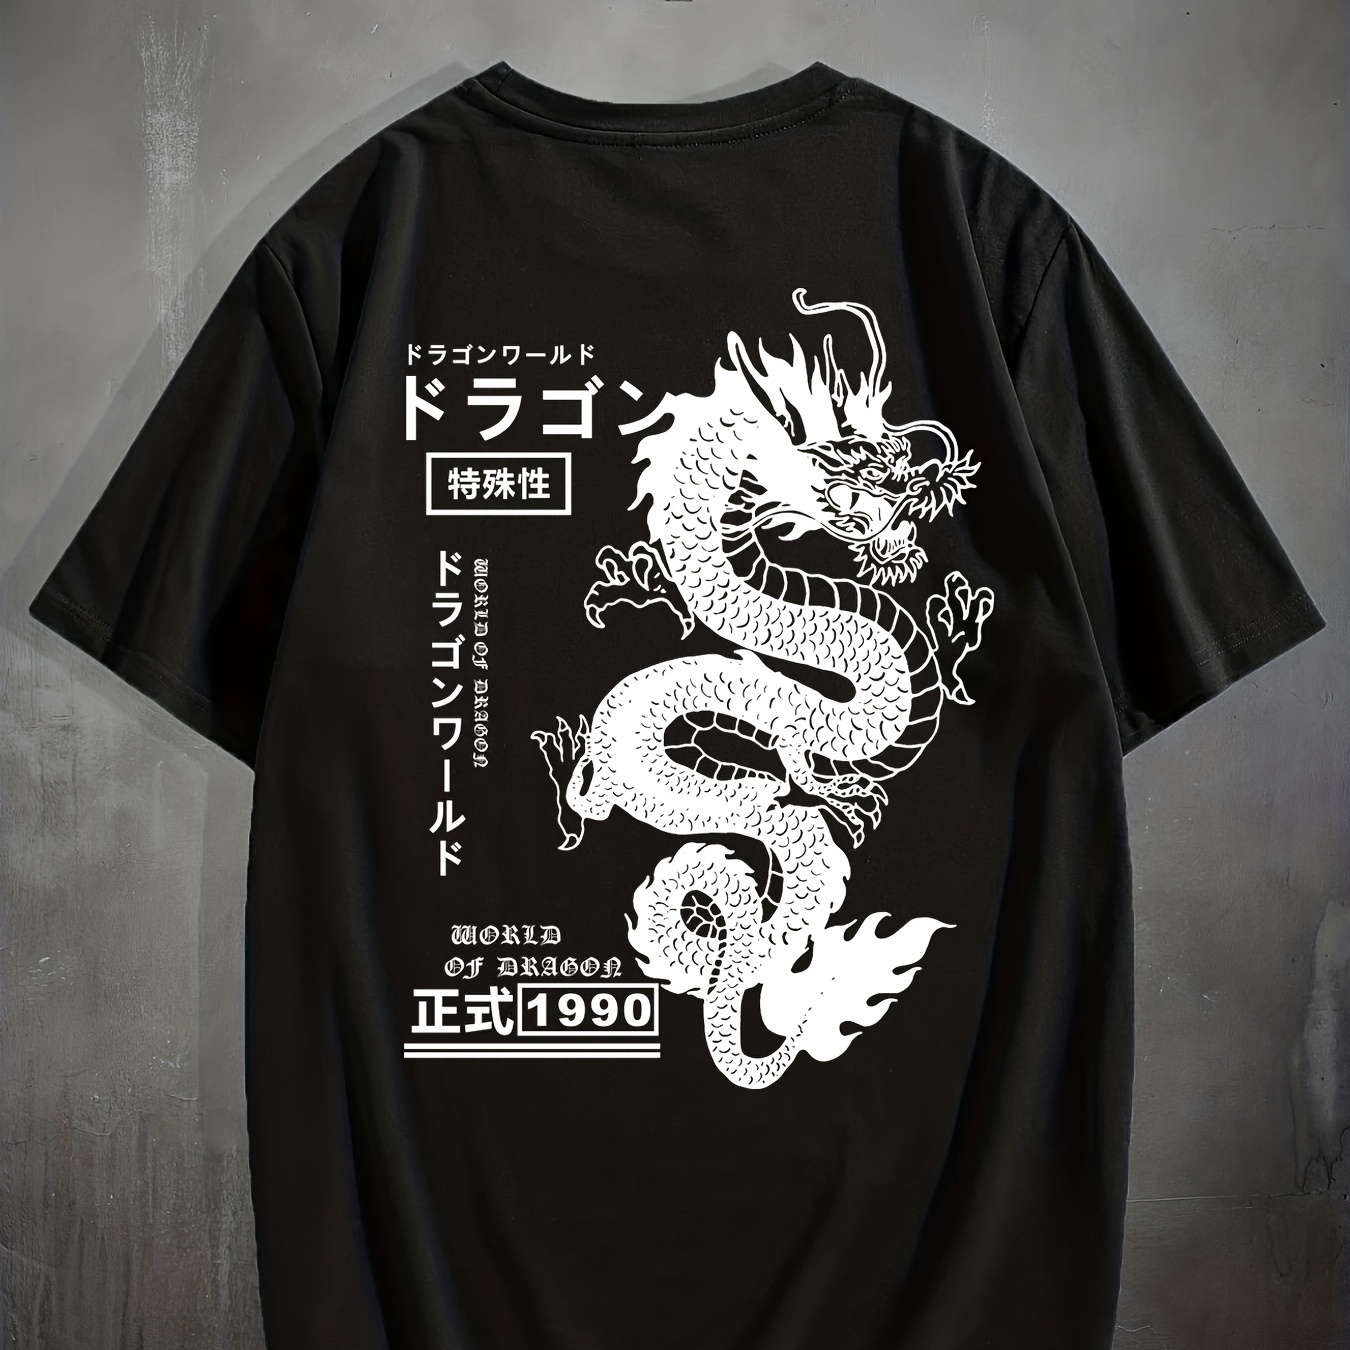 

Dragon Graphic T-shirt For Men - Comfortable And Stretchy Tee For Summer Outdoor Activities